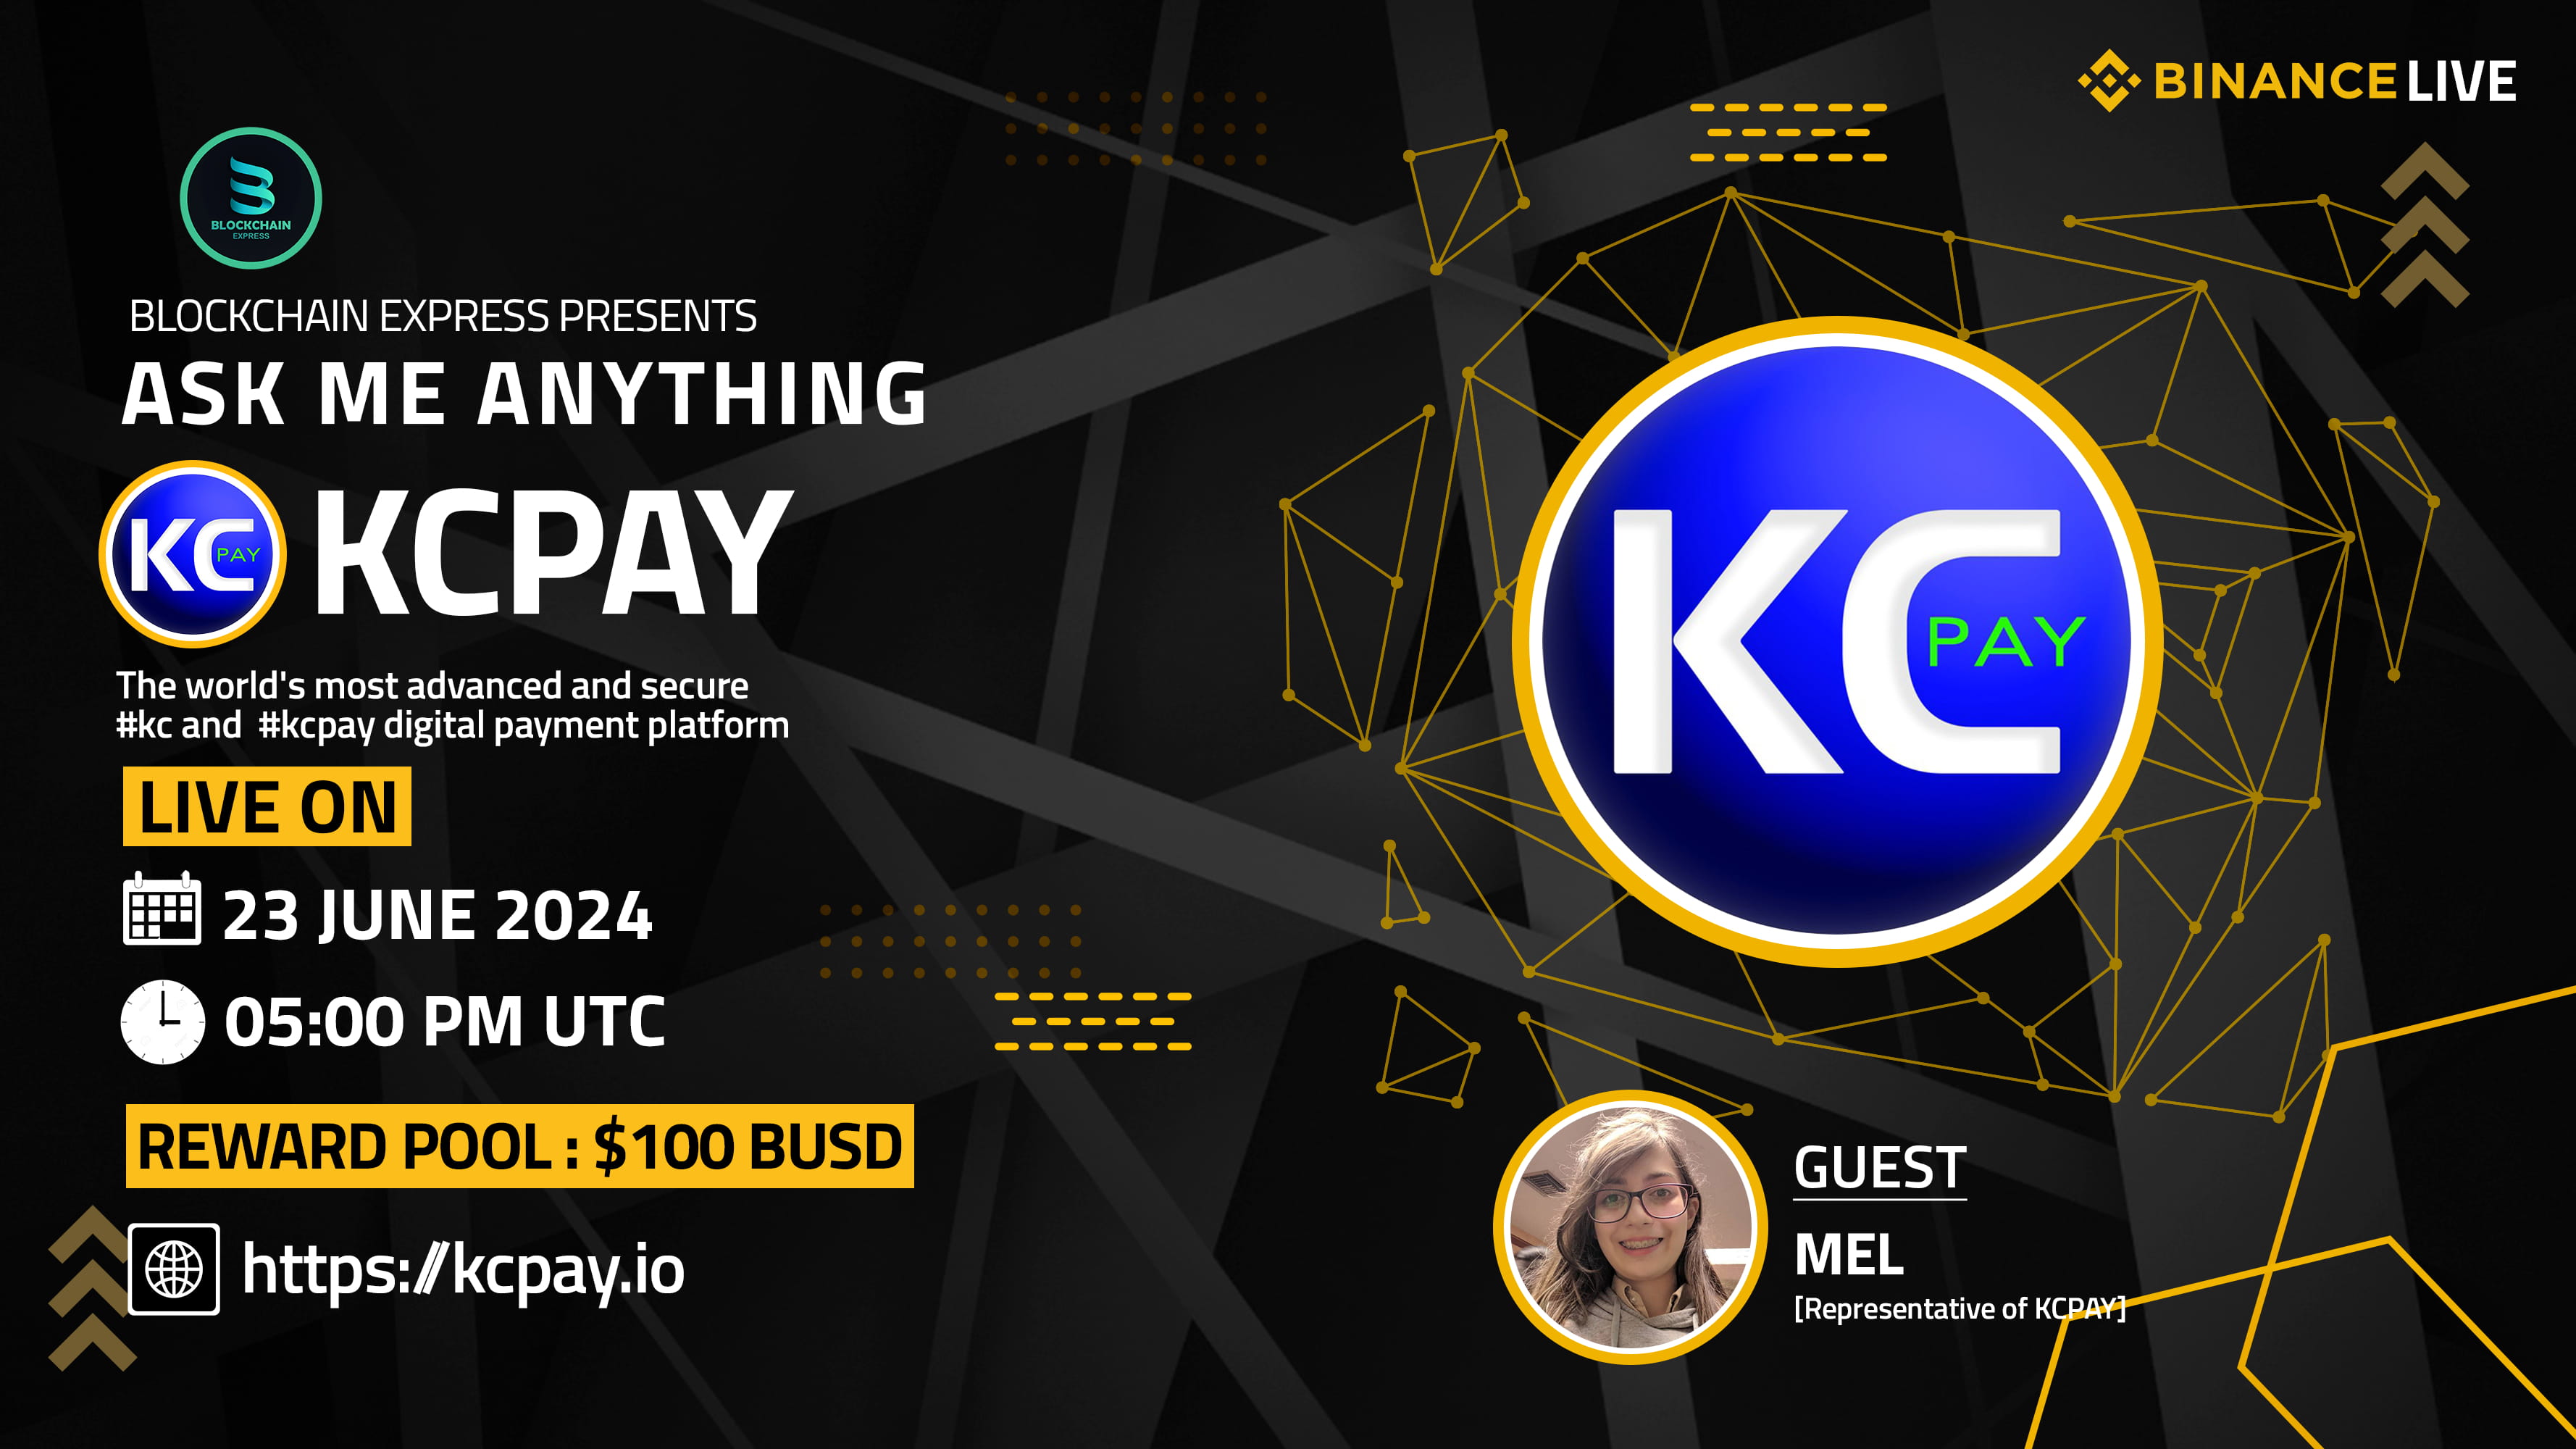 ₿lockchain Express will be hosting an AMA session with" KCPAY "